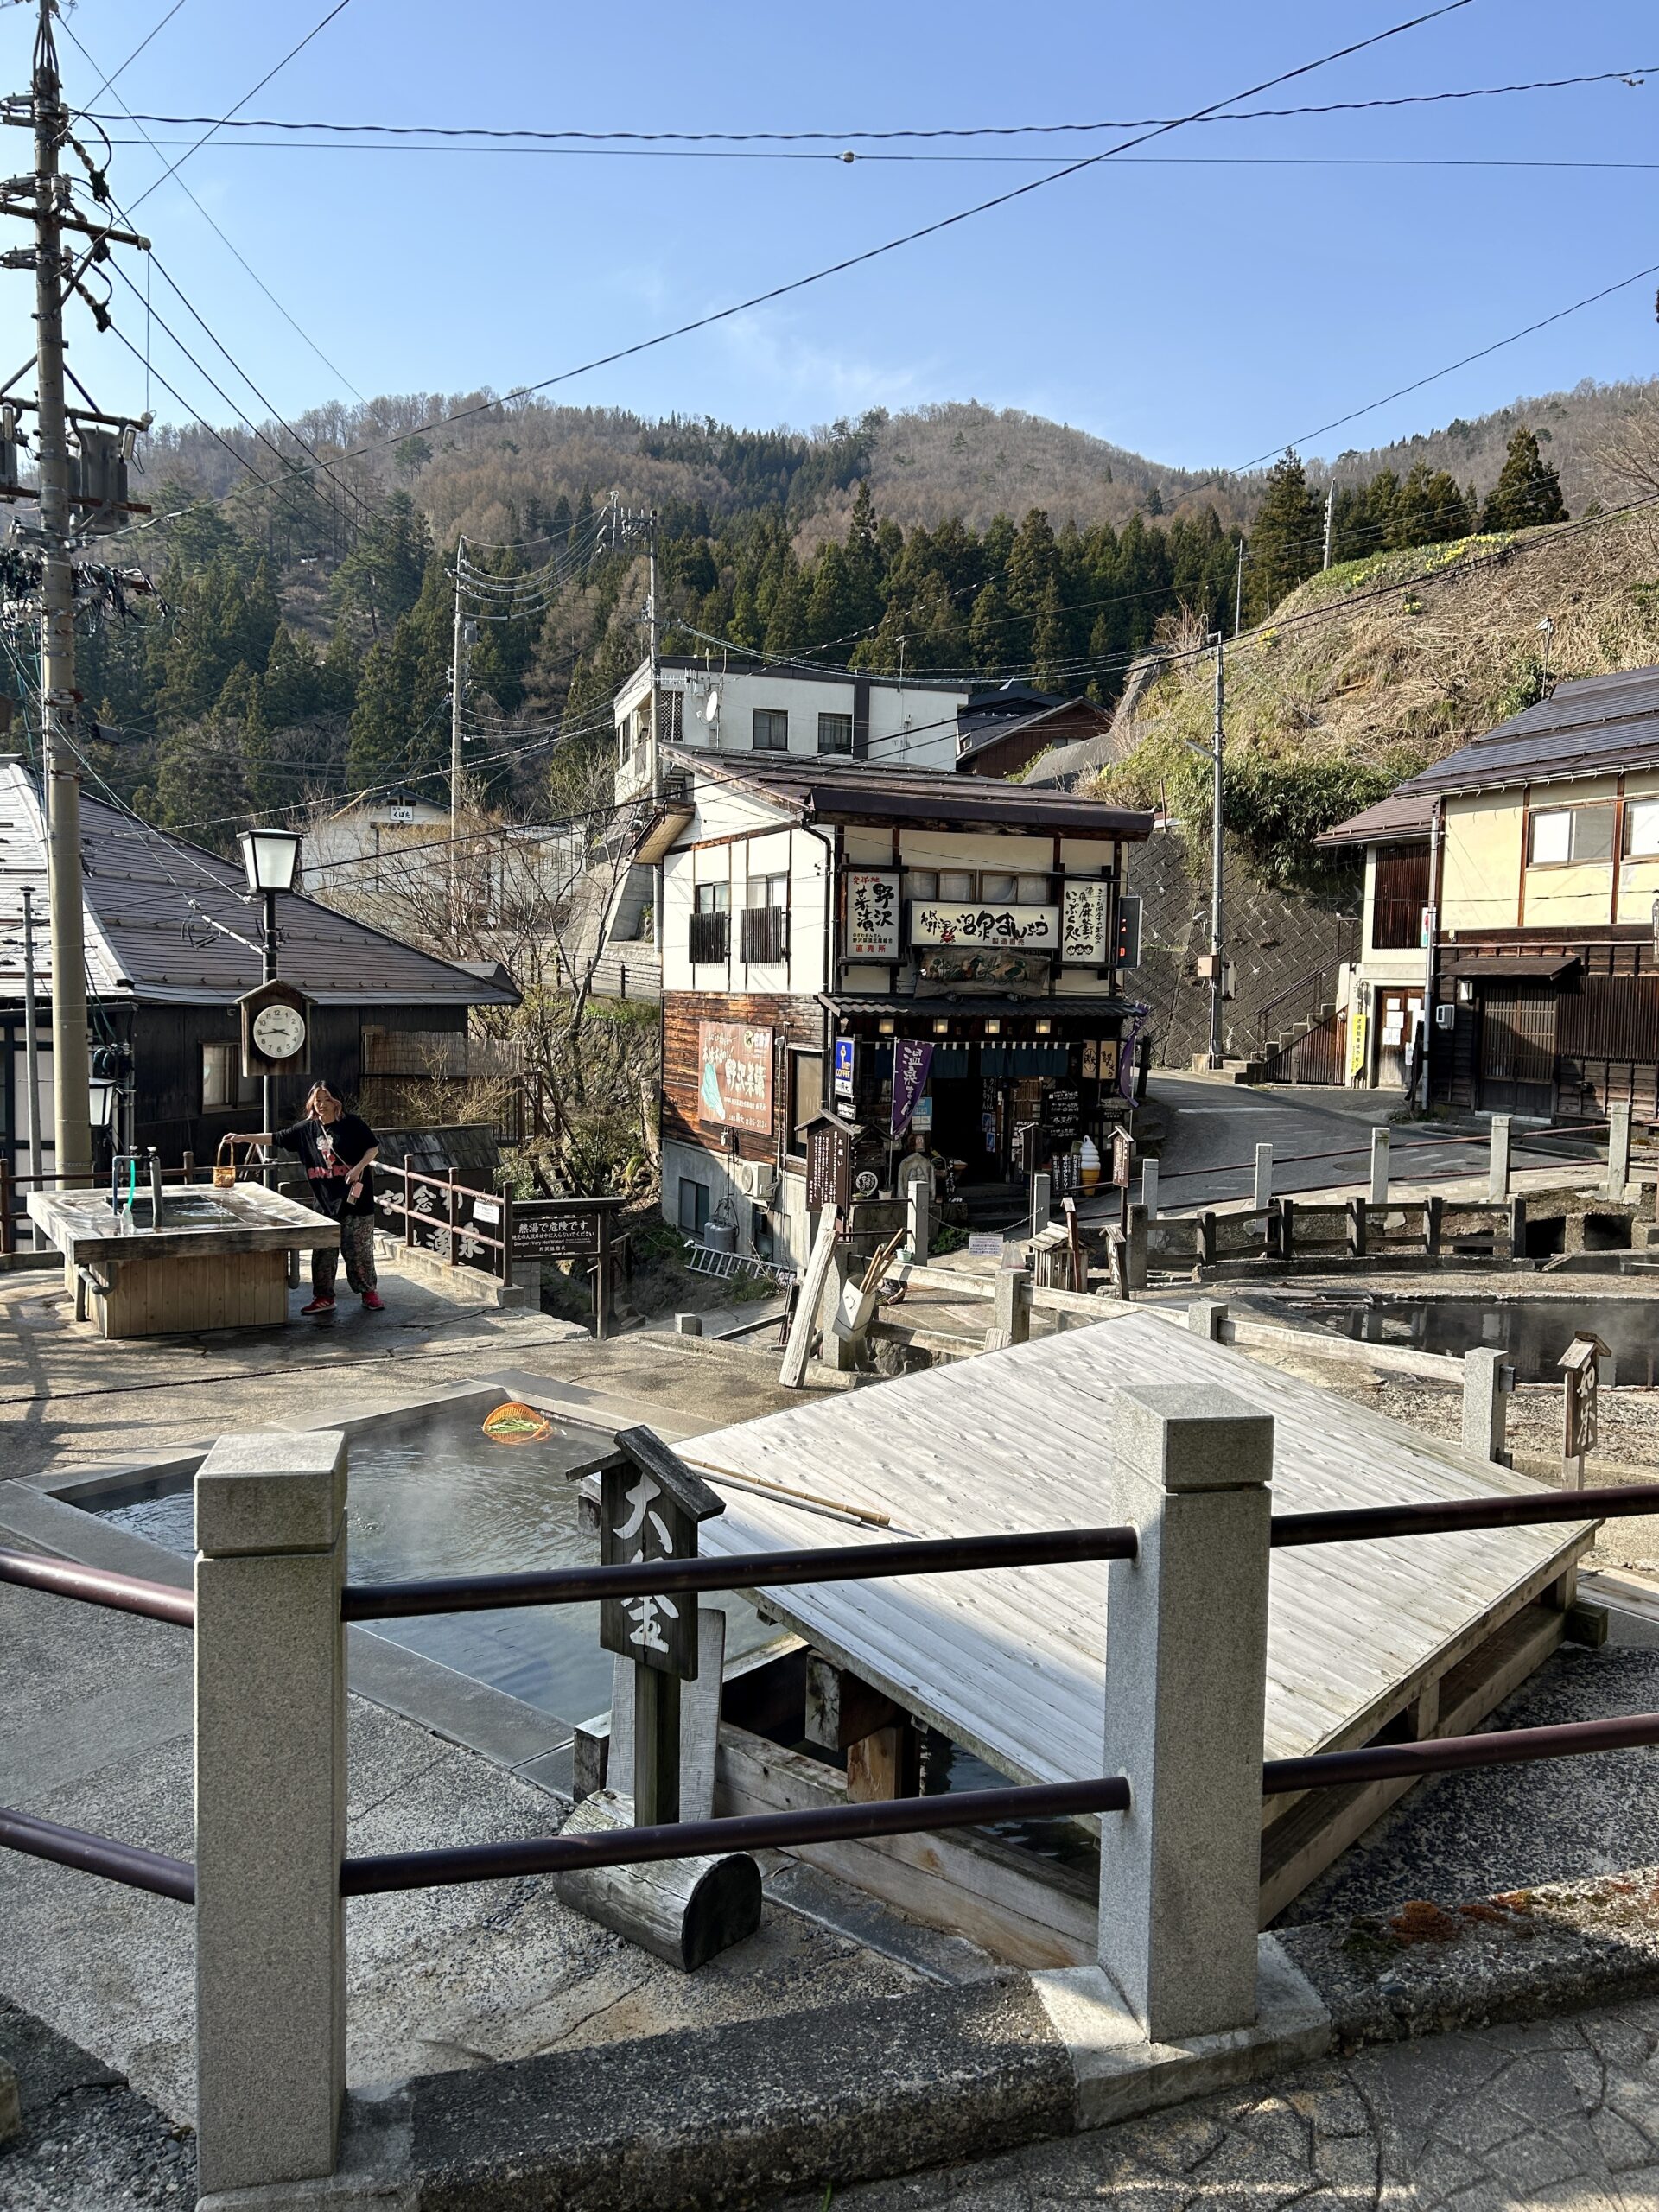 A short walk up in town will get you to a beautiful spot overlooking the village of Nozawa